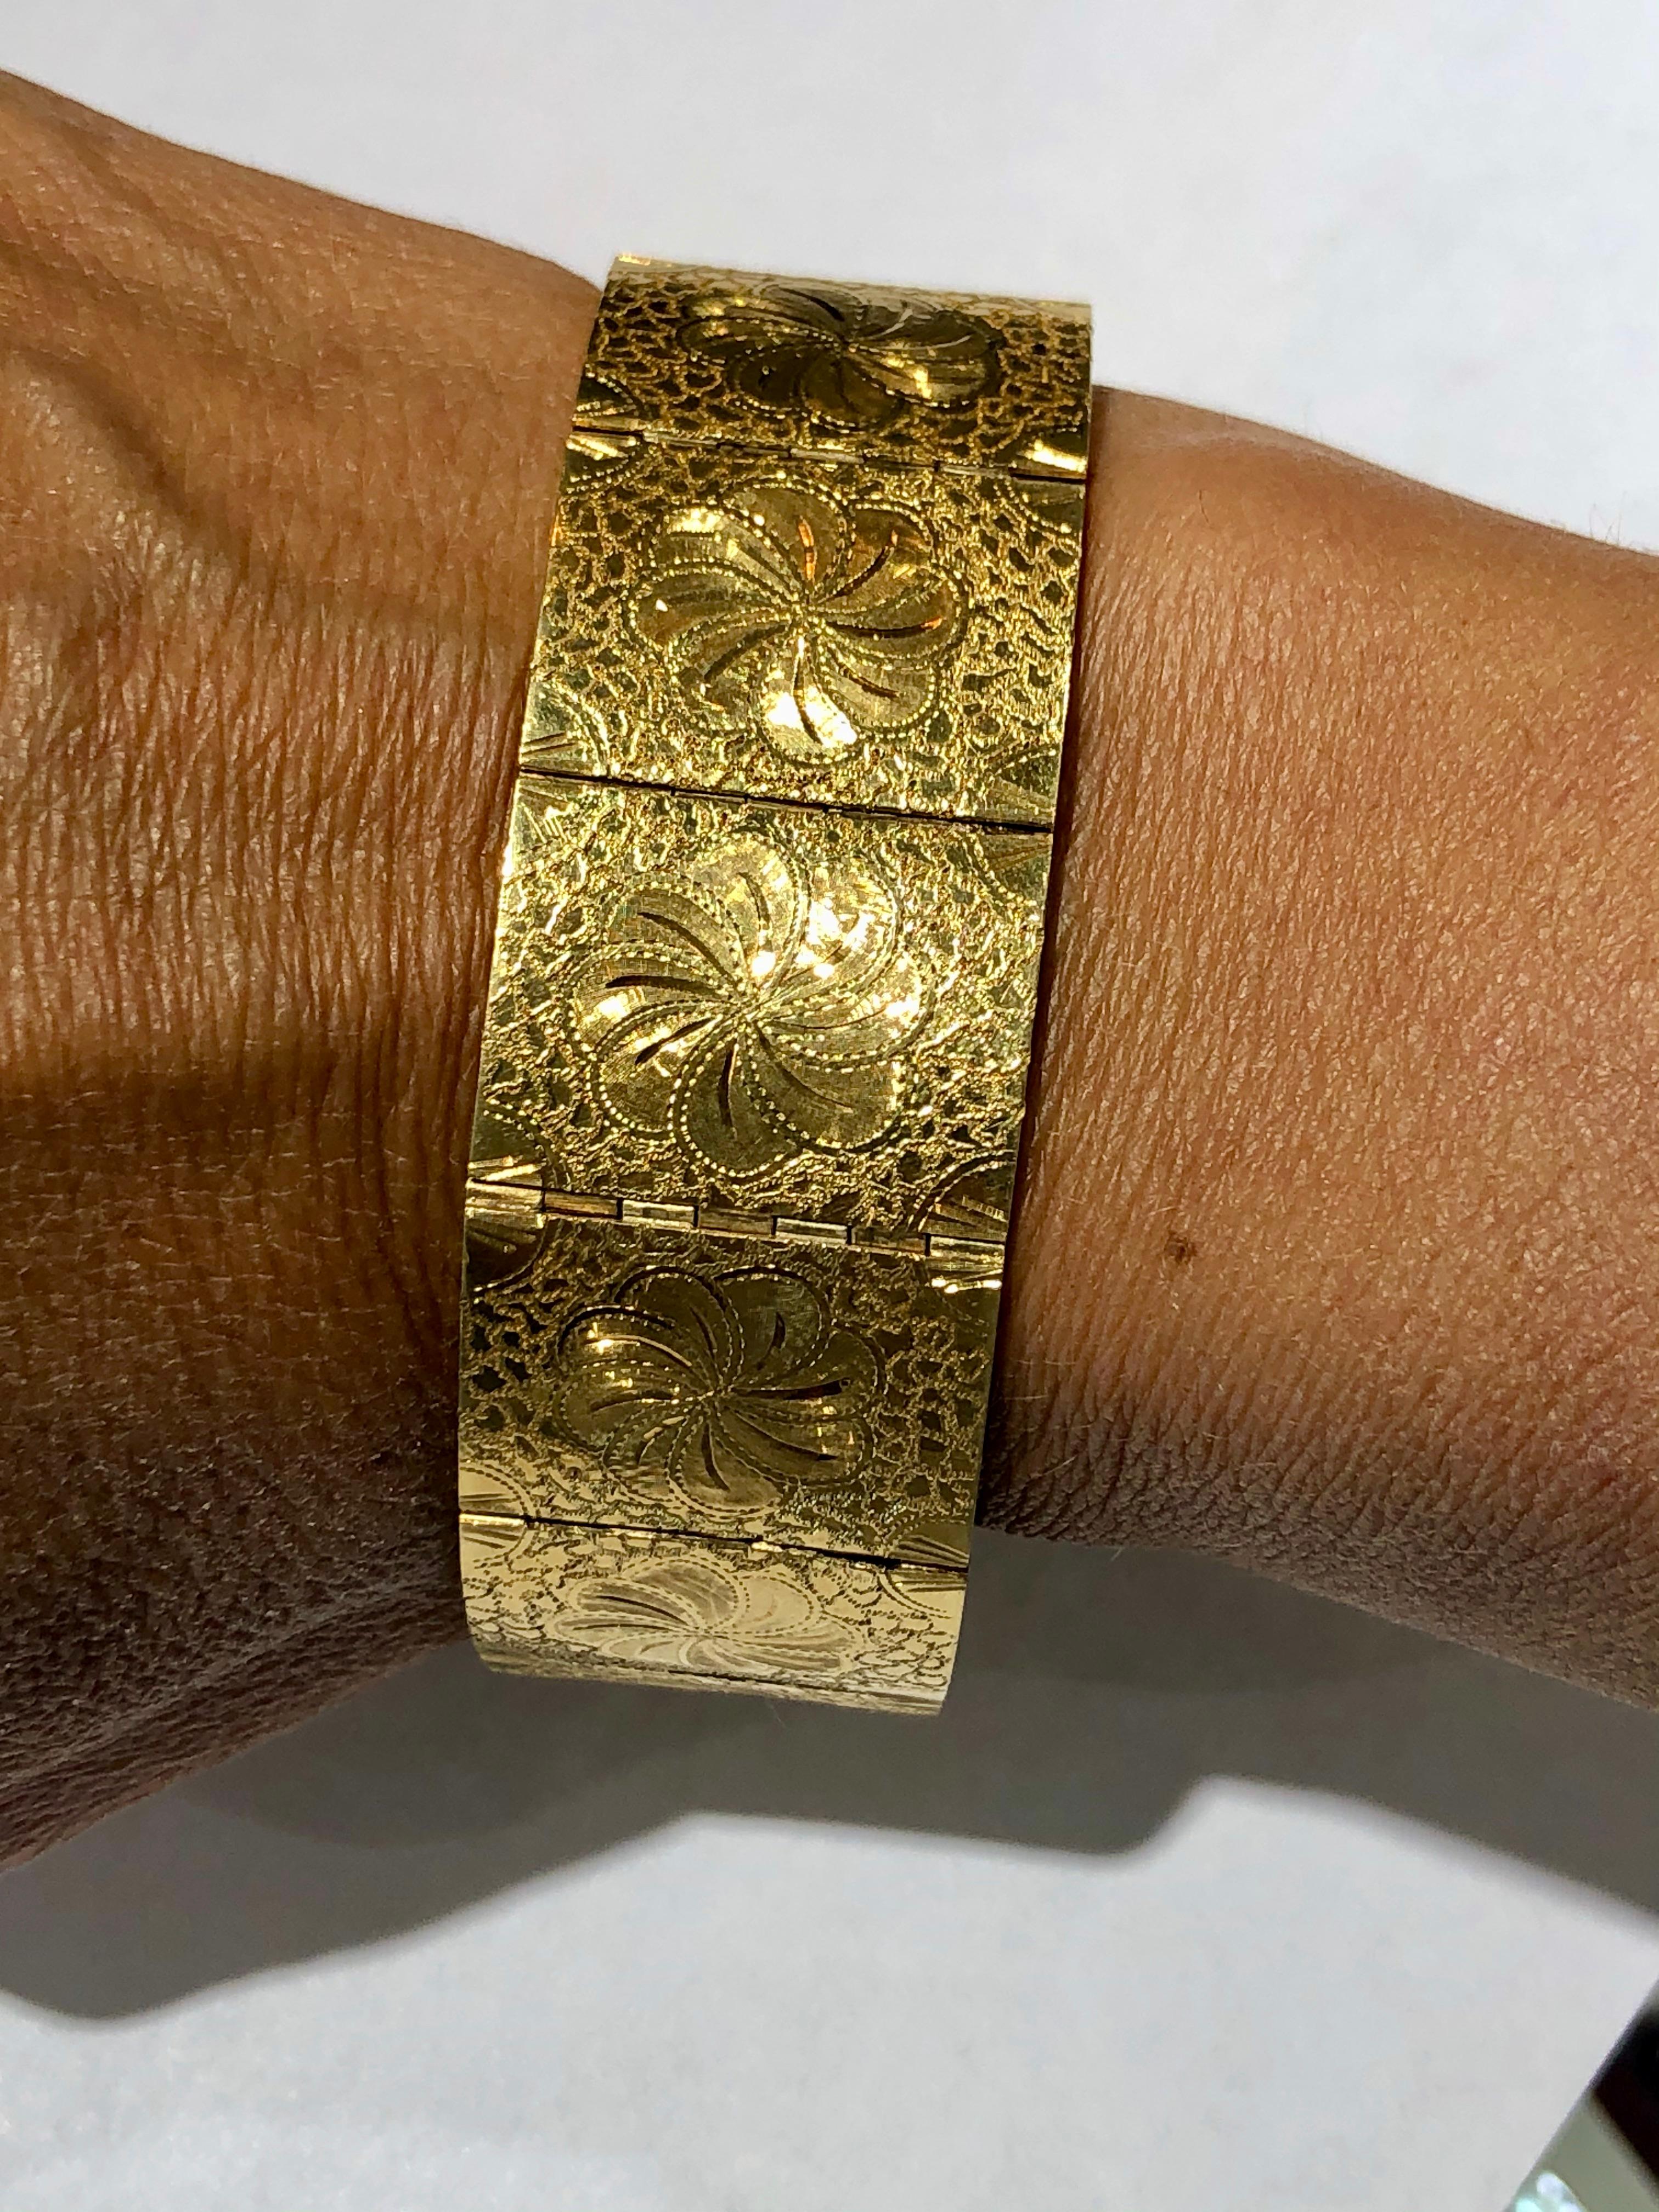 Vintage late 70's early 80's bracelet, masterfully crafted from solid 18 Karat yellow gold hand engraving work. Wonderful addition to your jewelry collection! 
DIMENSIONS:
Wide  .94 in. x  Length 7.5 in
Wide  23.88 mm x Length 190.5 mm
Weighs 61.3